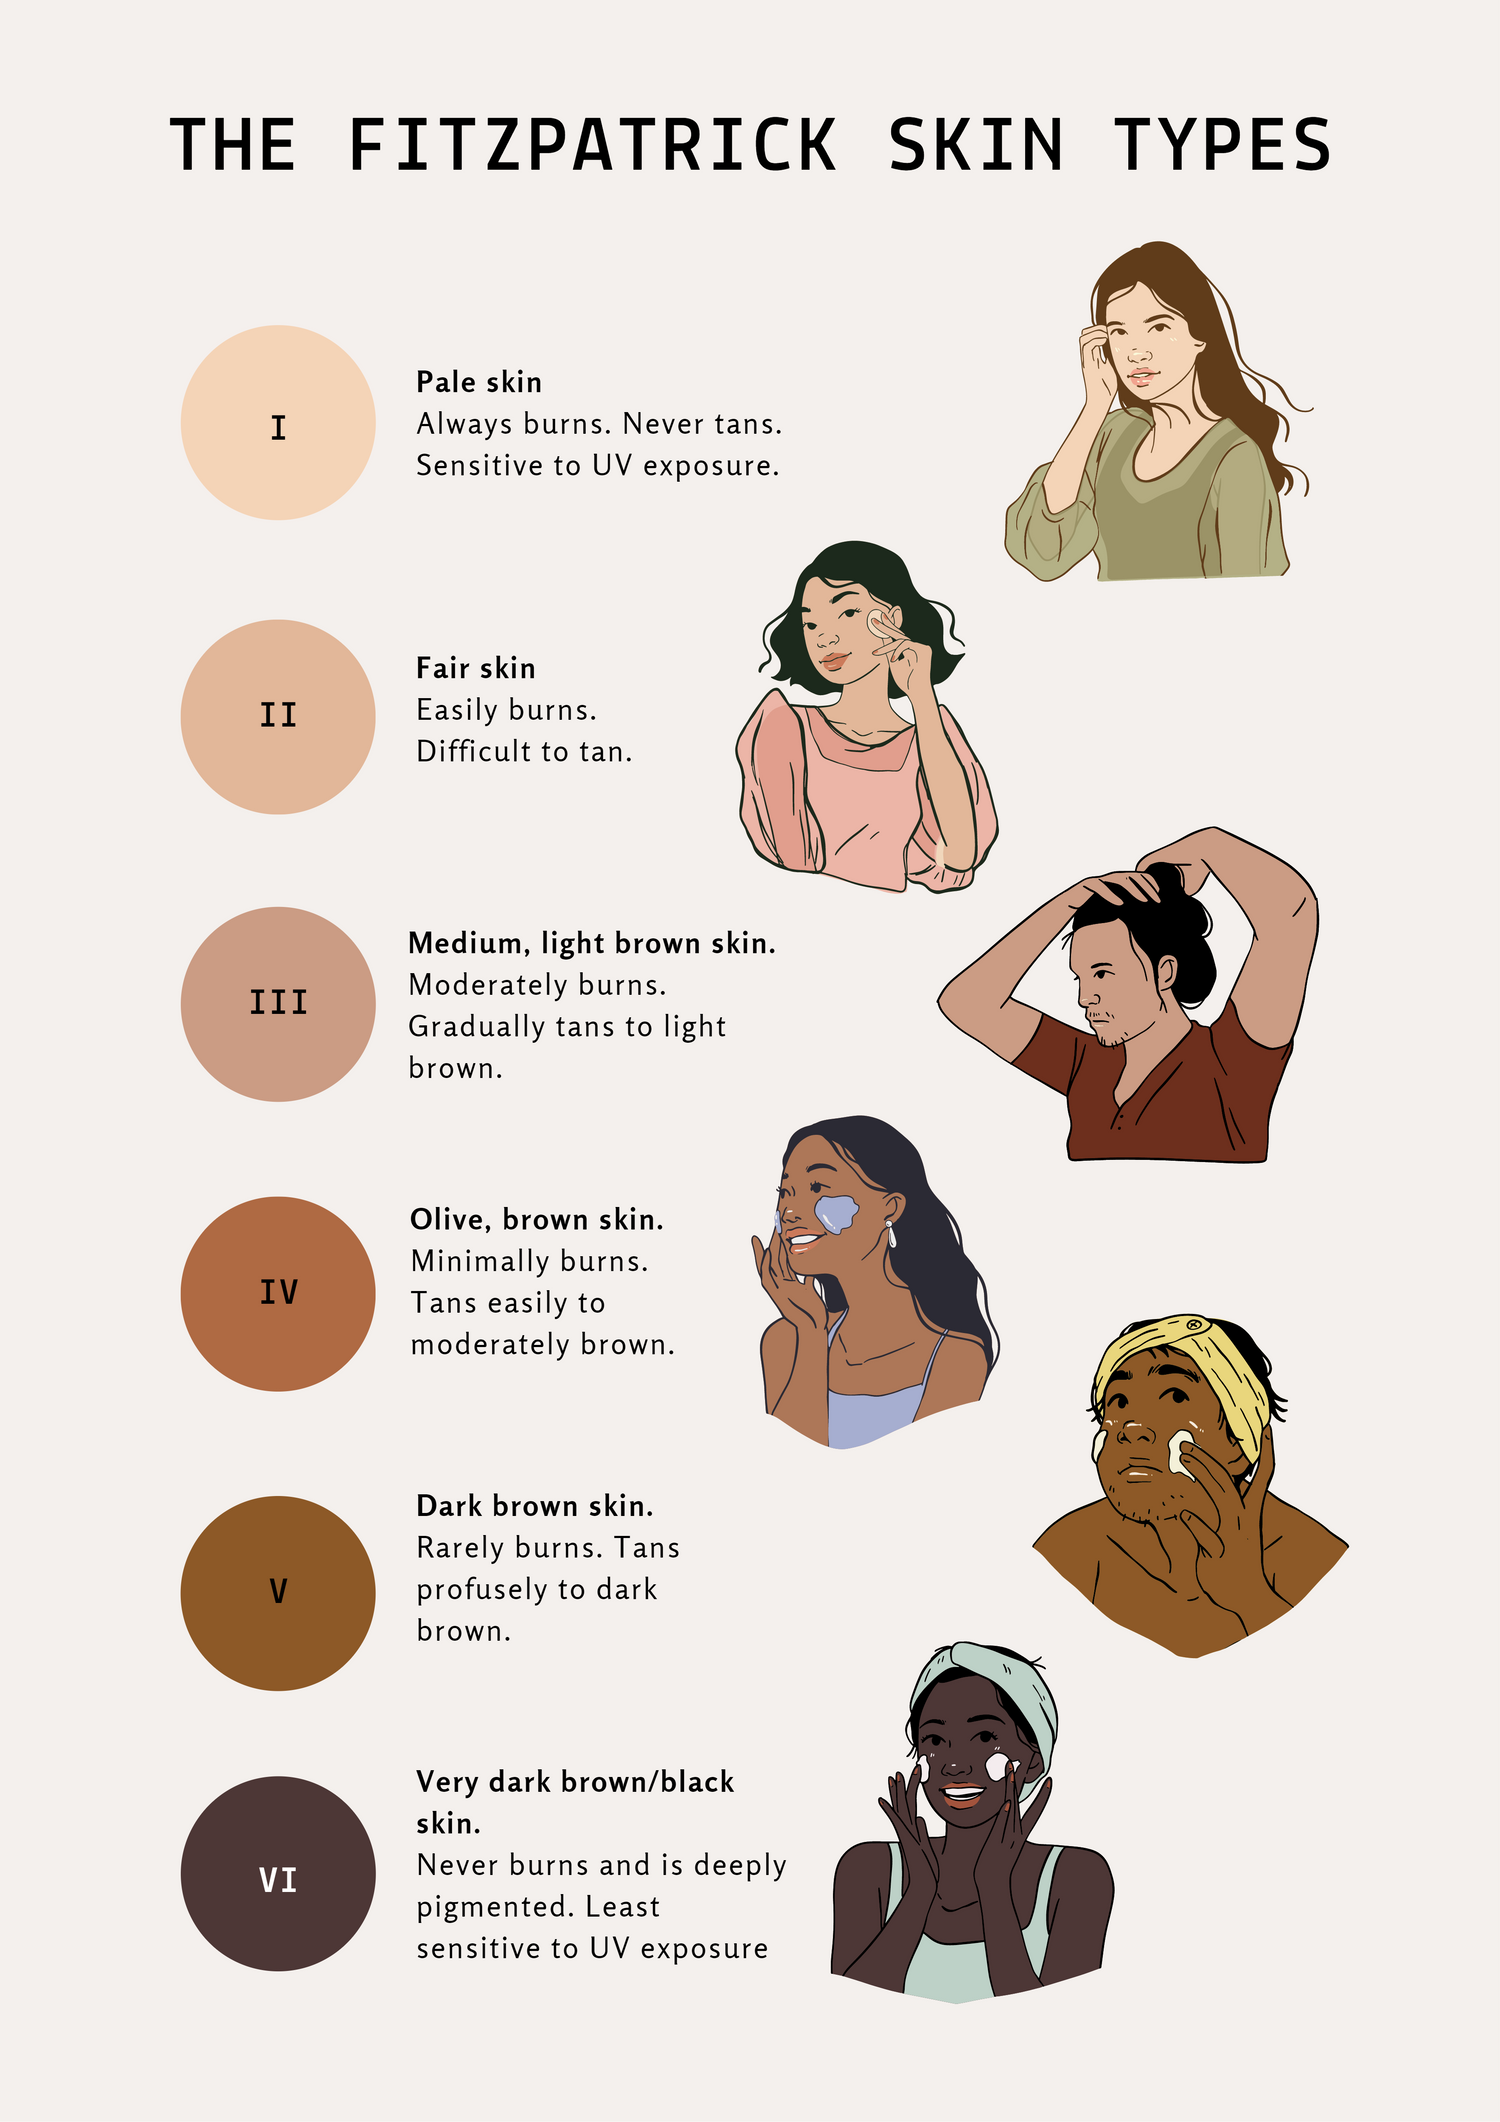 The Fitzpatrick Skin Types. Types I - VI. Description and depiction of skin types.